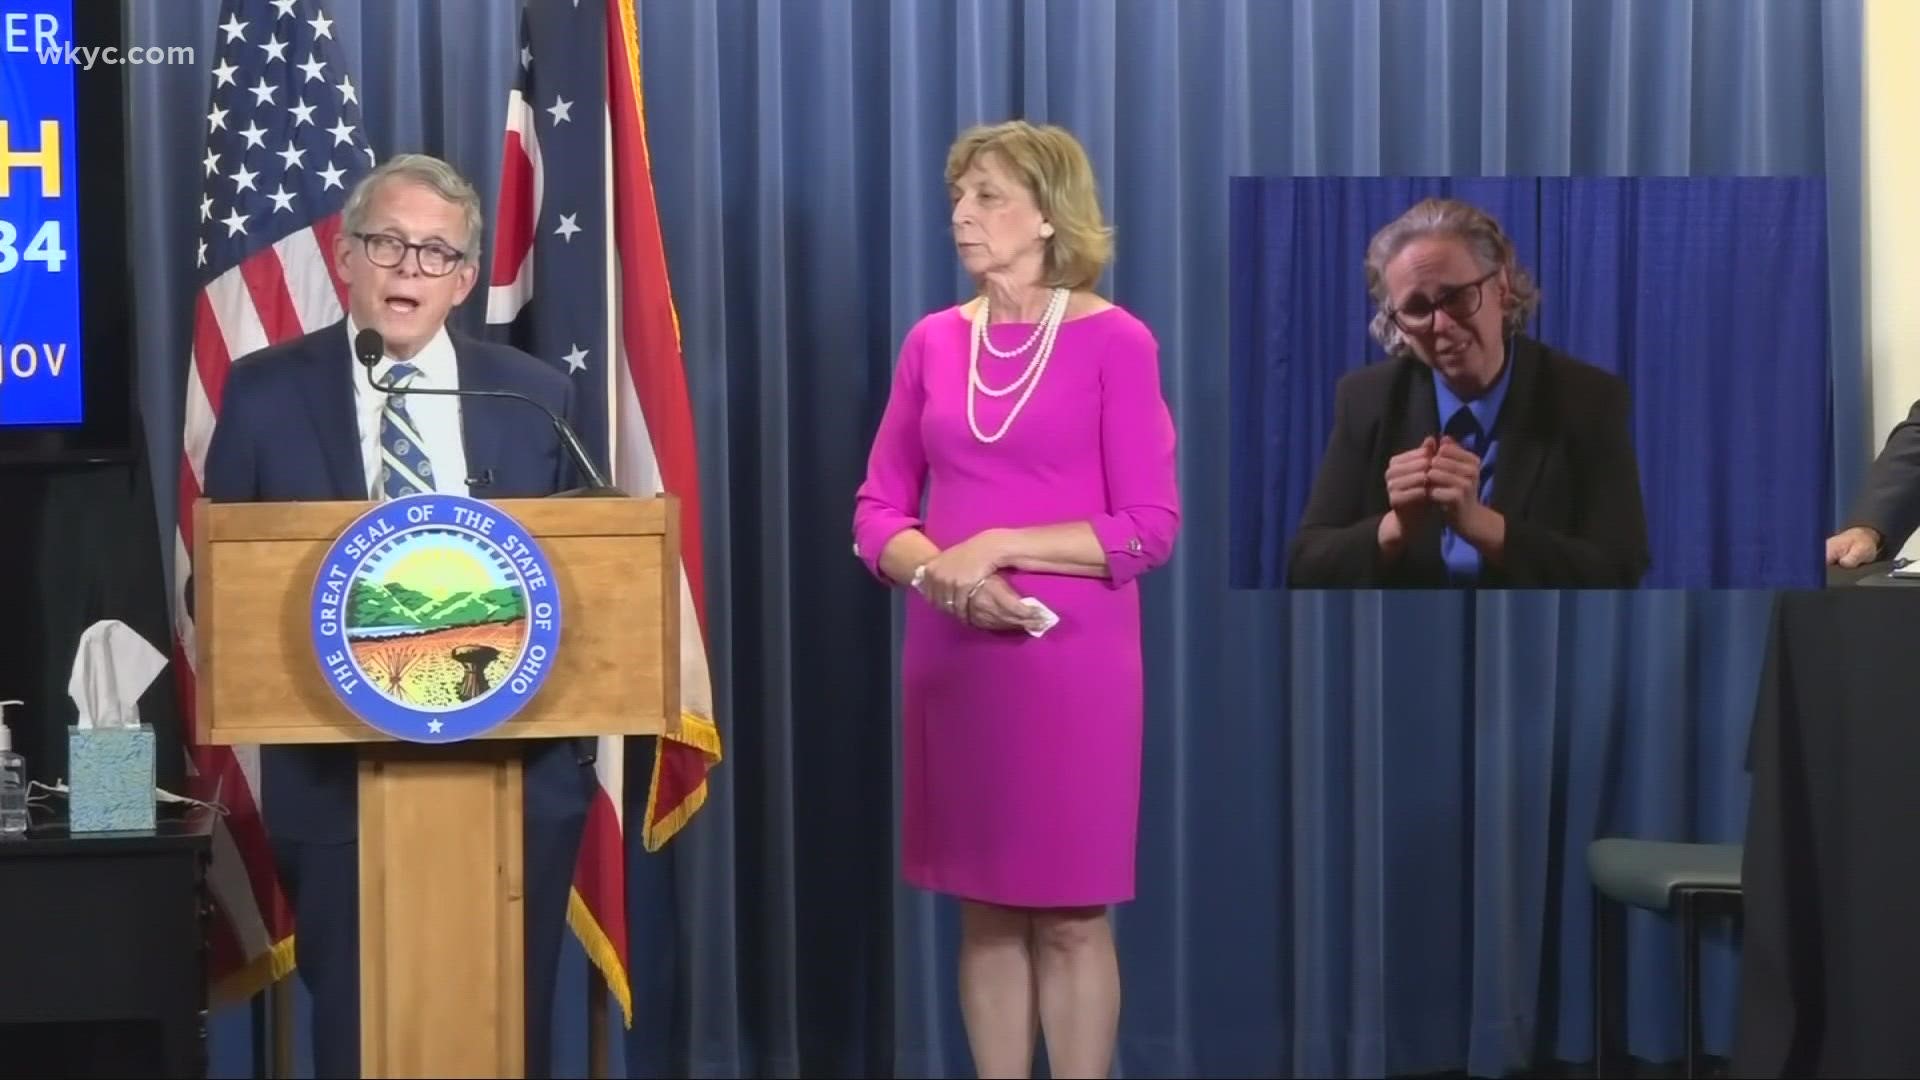 Gov. DeWine and his wife Fran were exposed to COVID earlier this week. They have both tested negative.